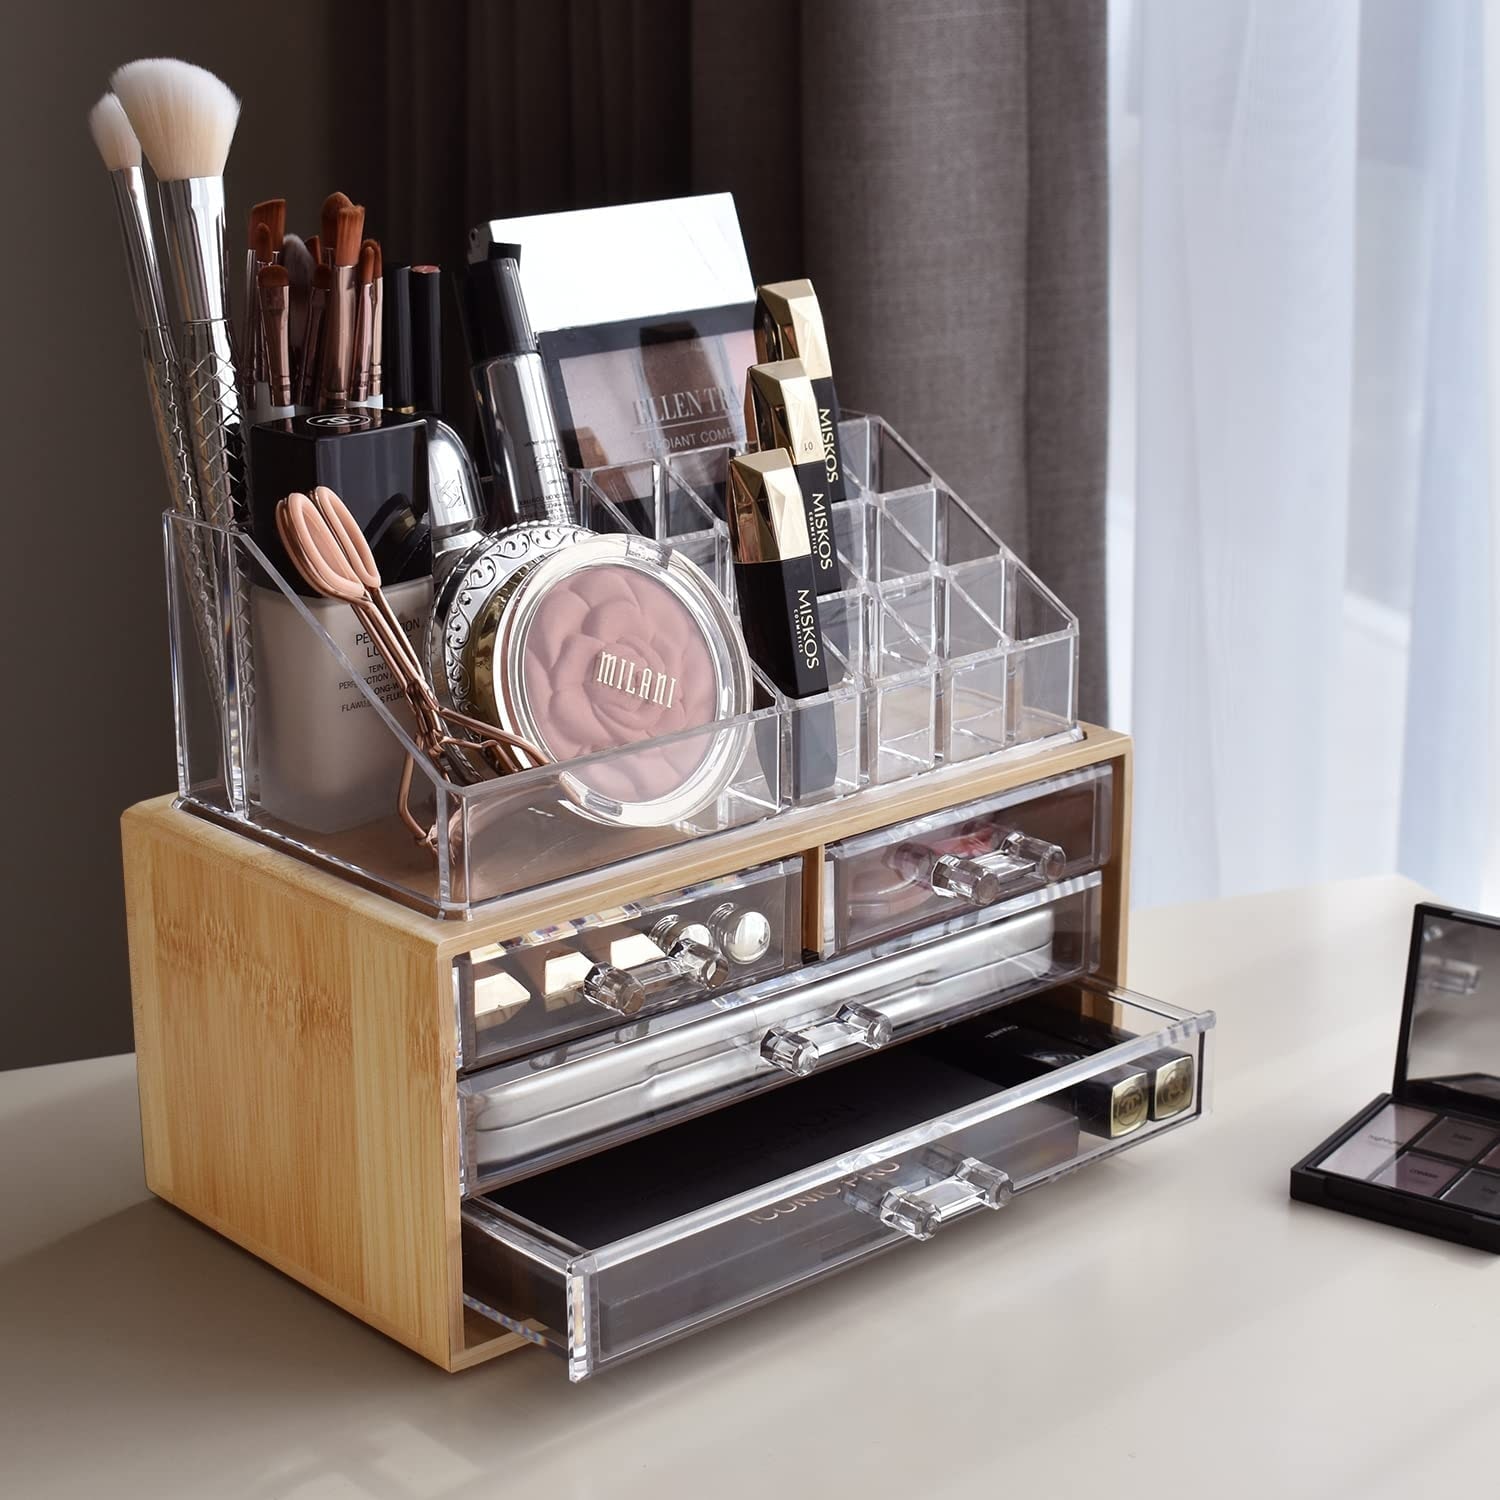 https://ak1.ostkcdn.com/images/products/is/images/direct/7bfe7ed0b5fb3fd76a71263fba89bb04ec66041b/Bamboo-Makeup-Organizer-with-4-Acrylic-Storage.jpg